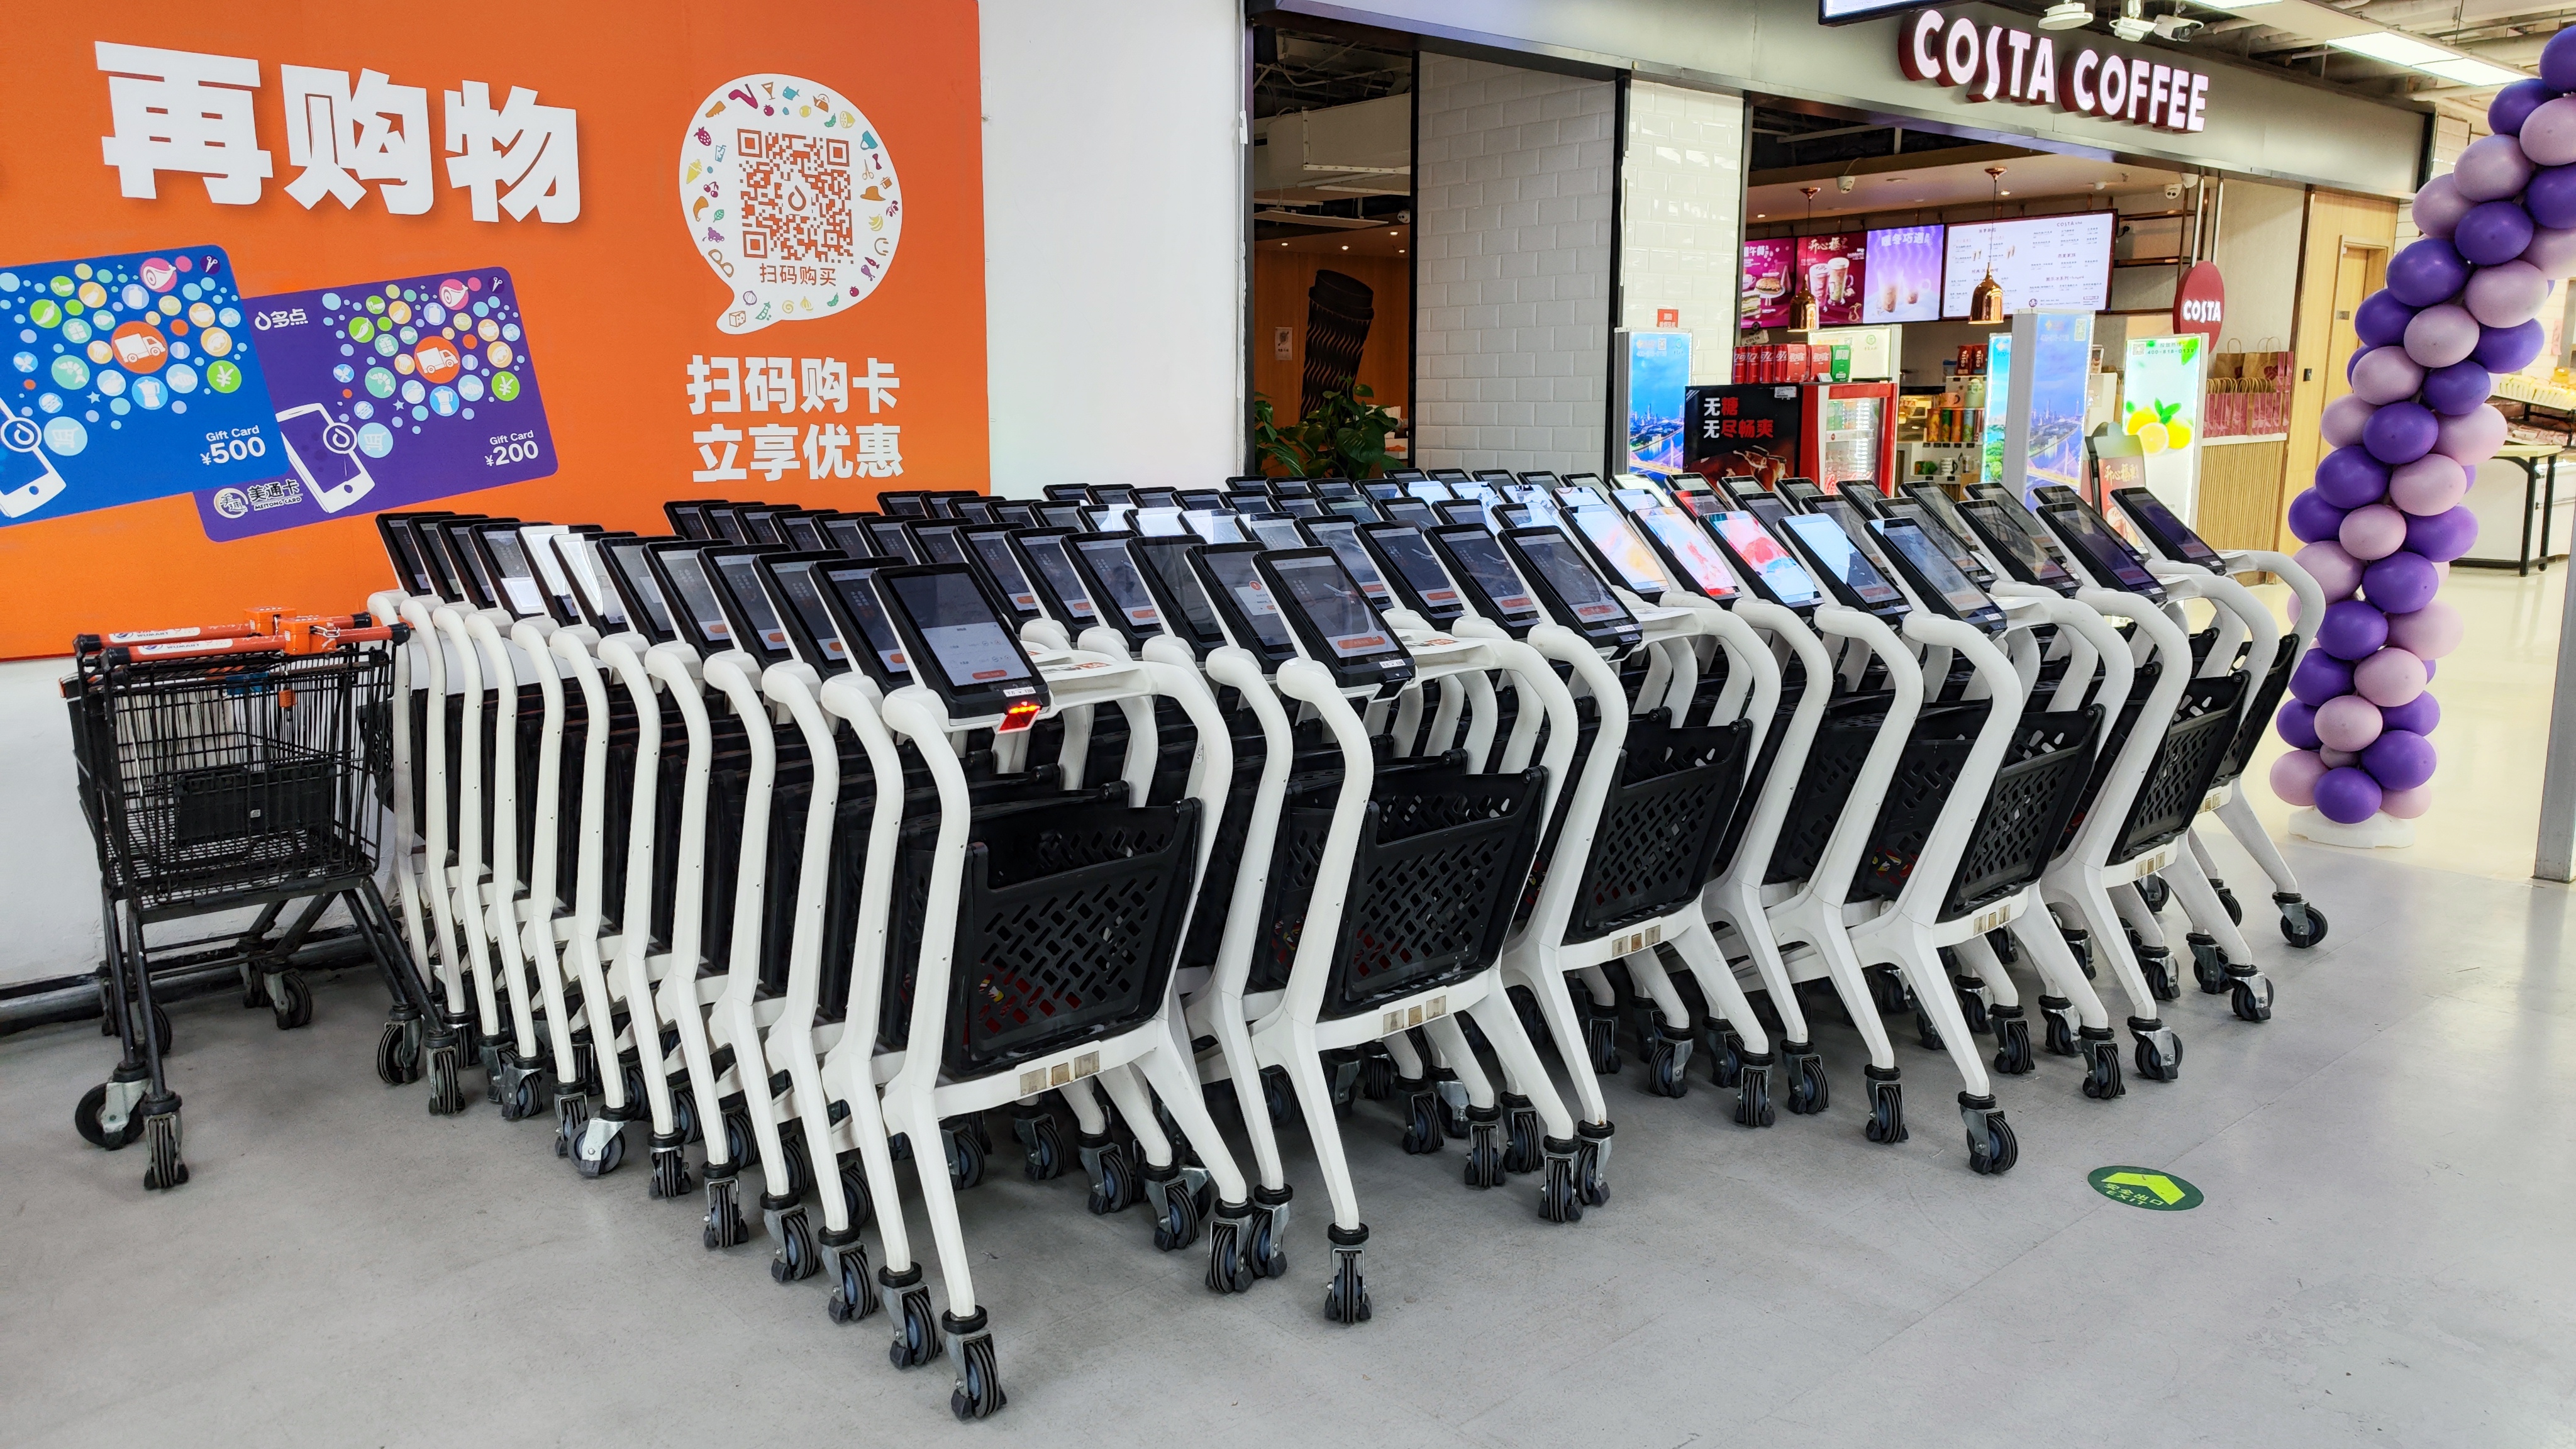 Why there are more an more smart shopping cart companies ?